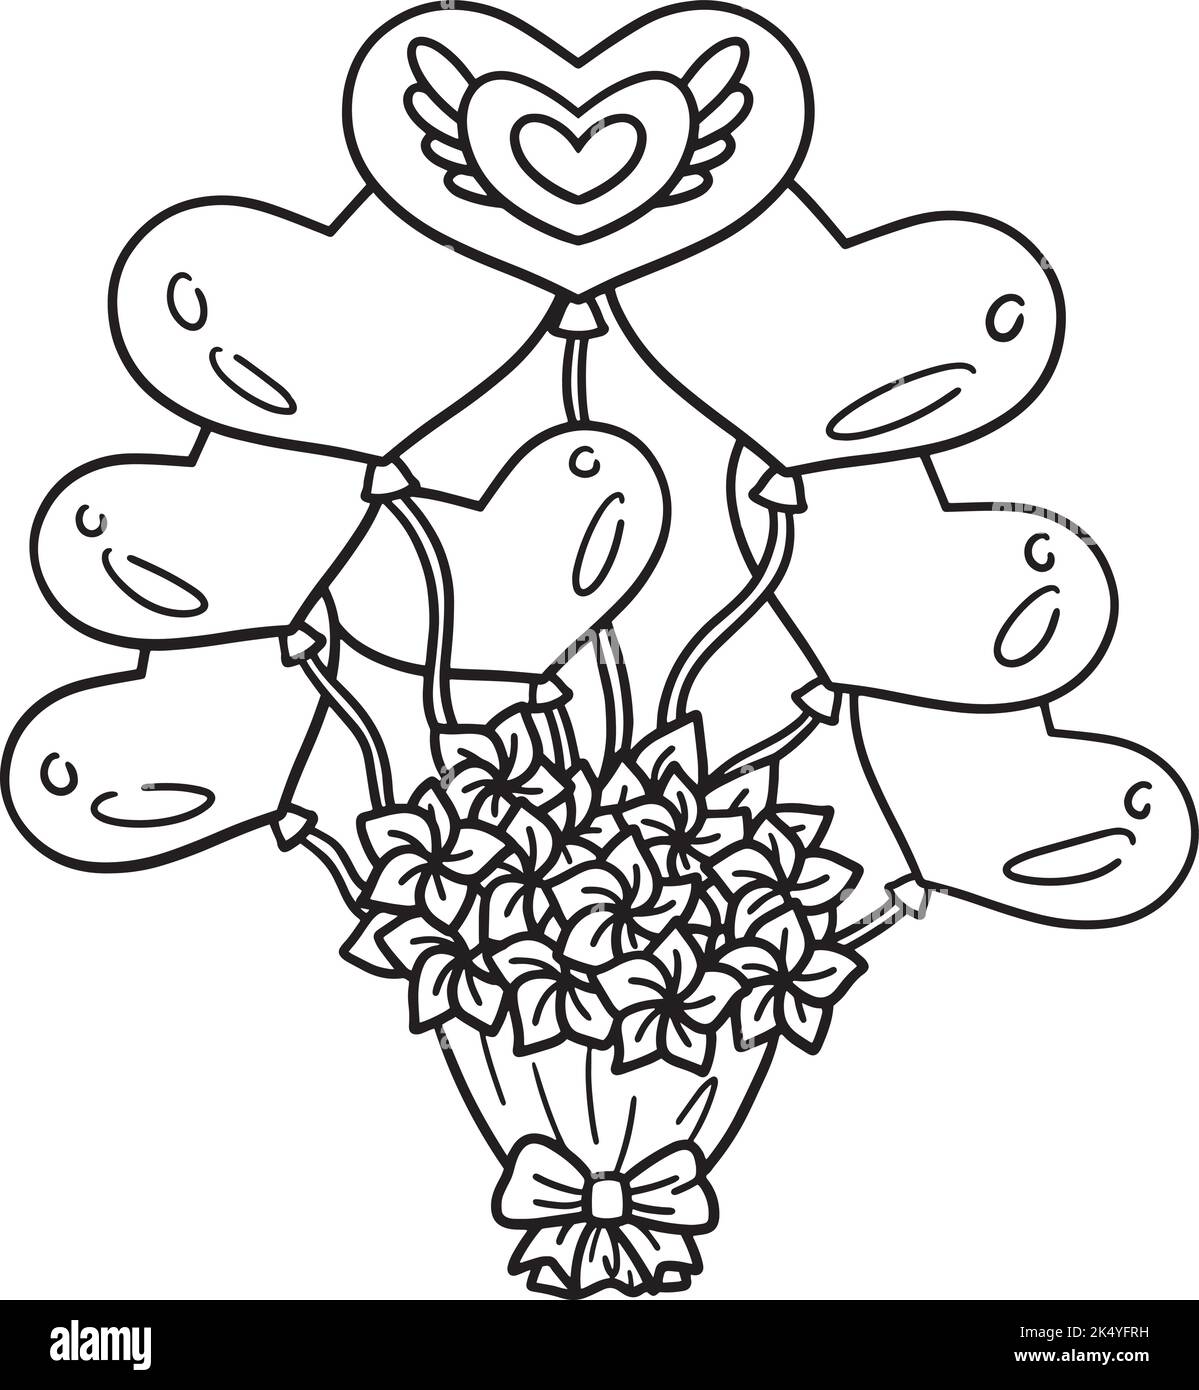 Hand tied wedding bouquet Stock Vector Images - Alamy